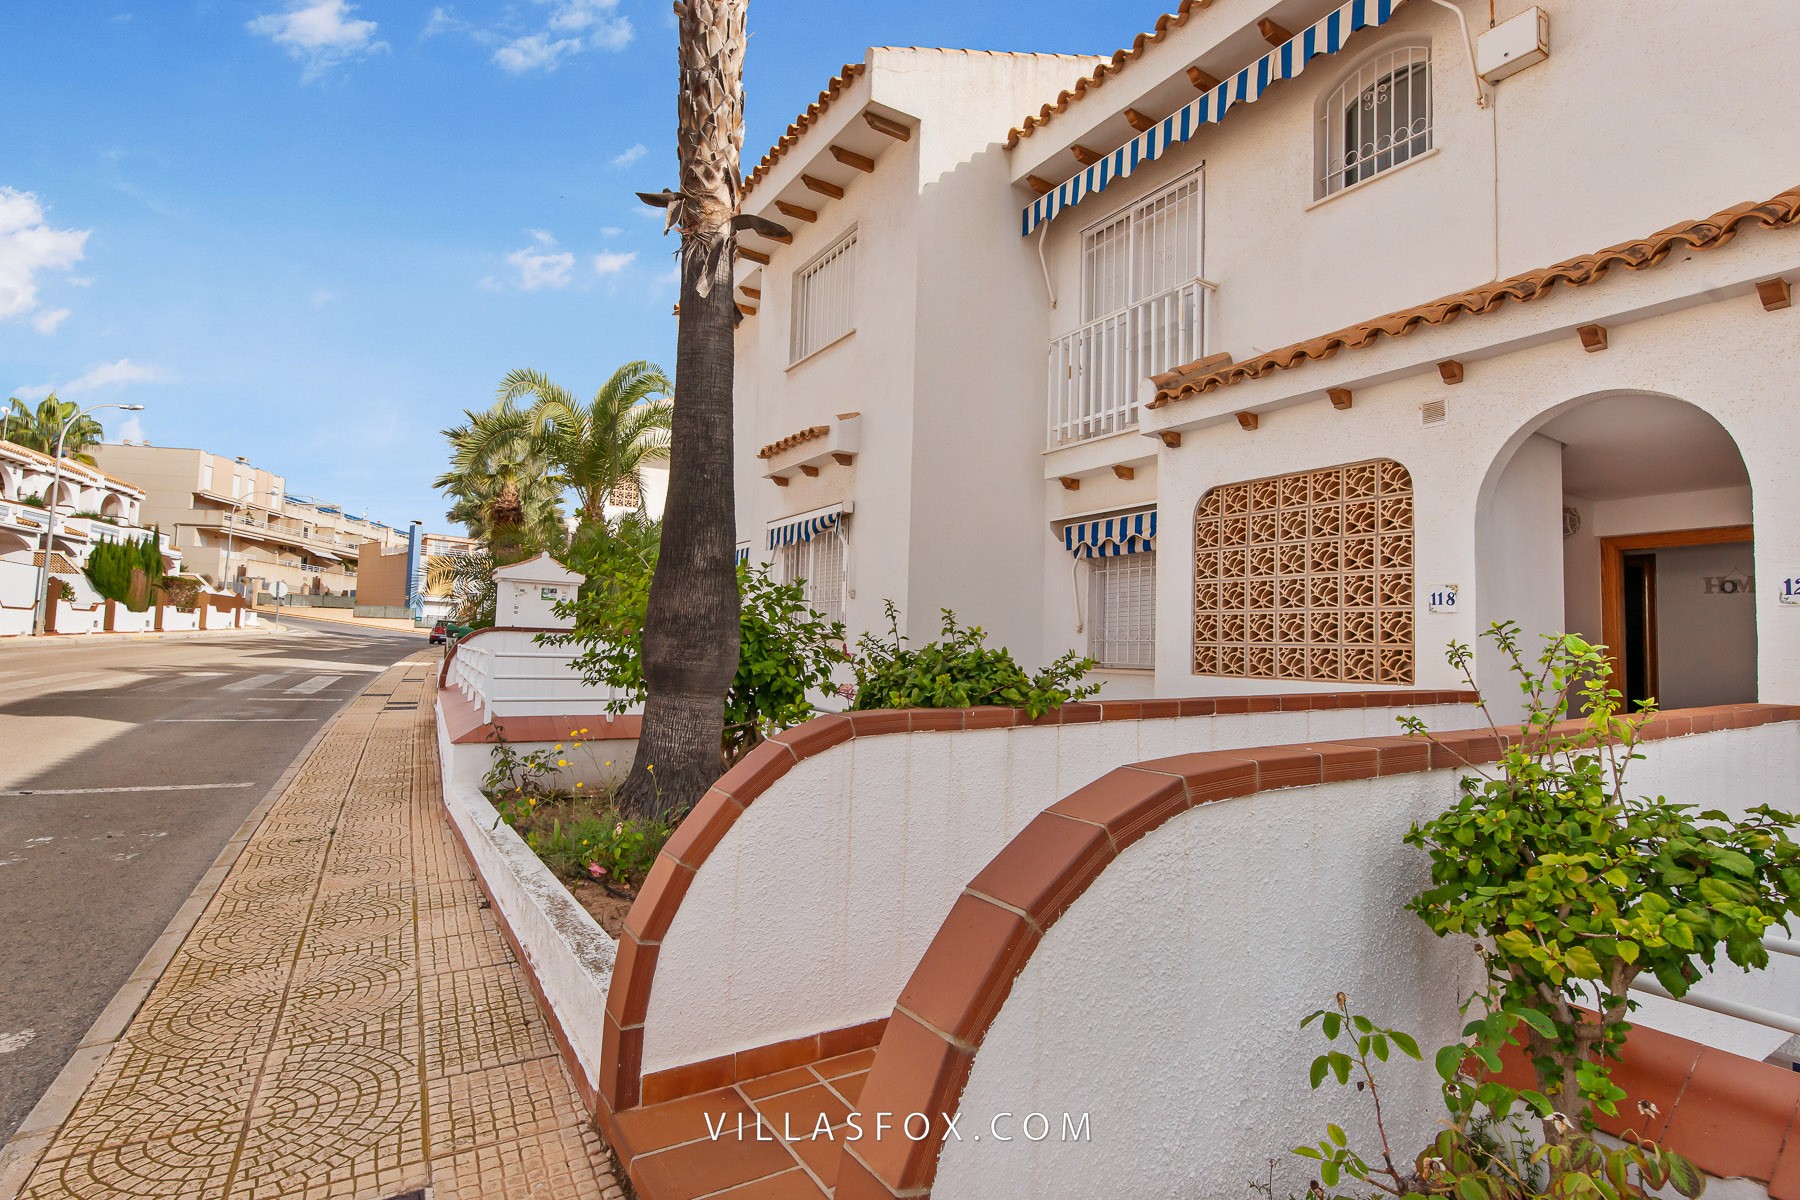 28755, Aguamarina 3-bedroom townhouse close to the beach with 2 garage spaces and store room